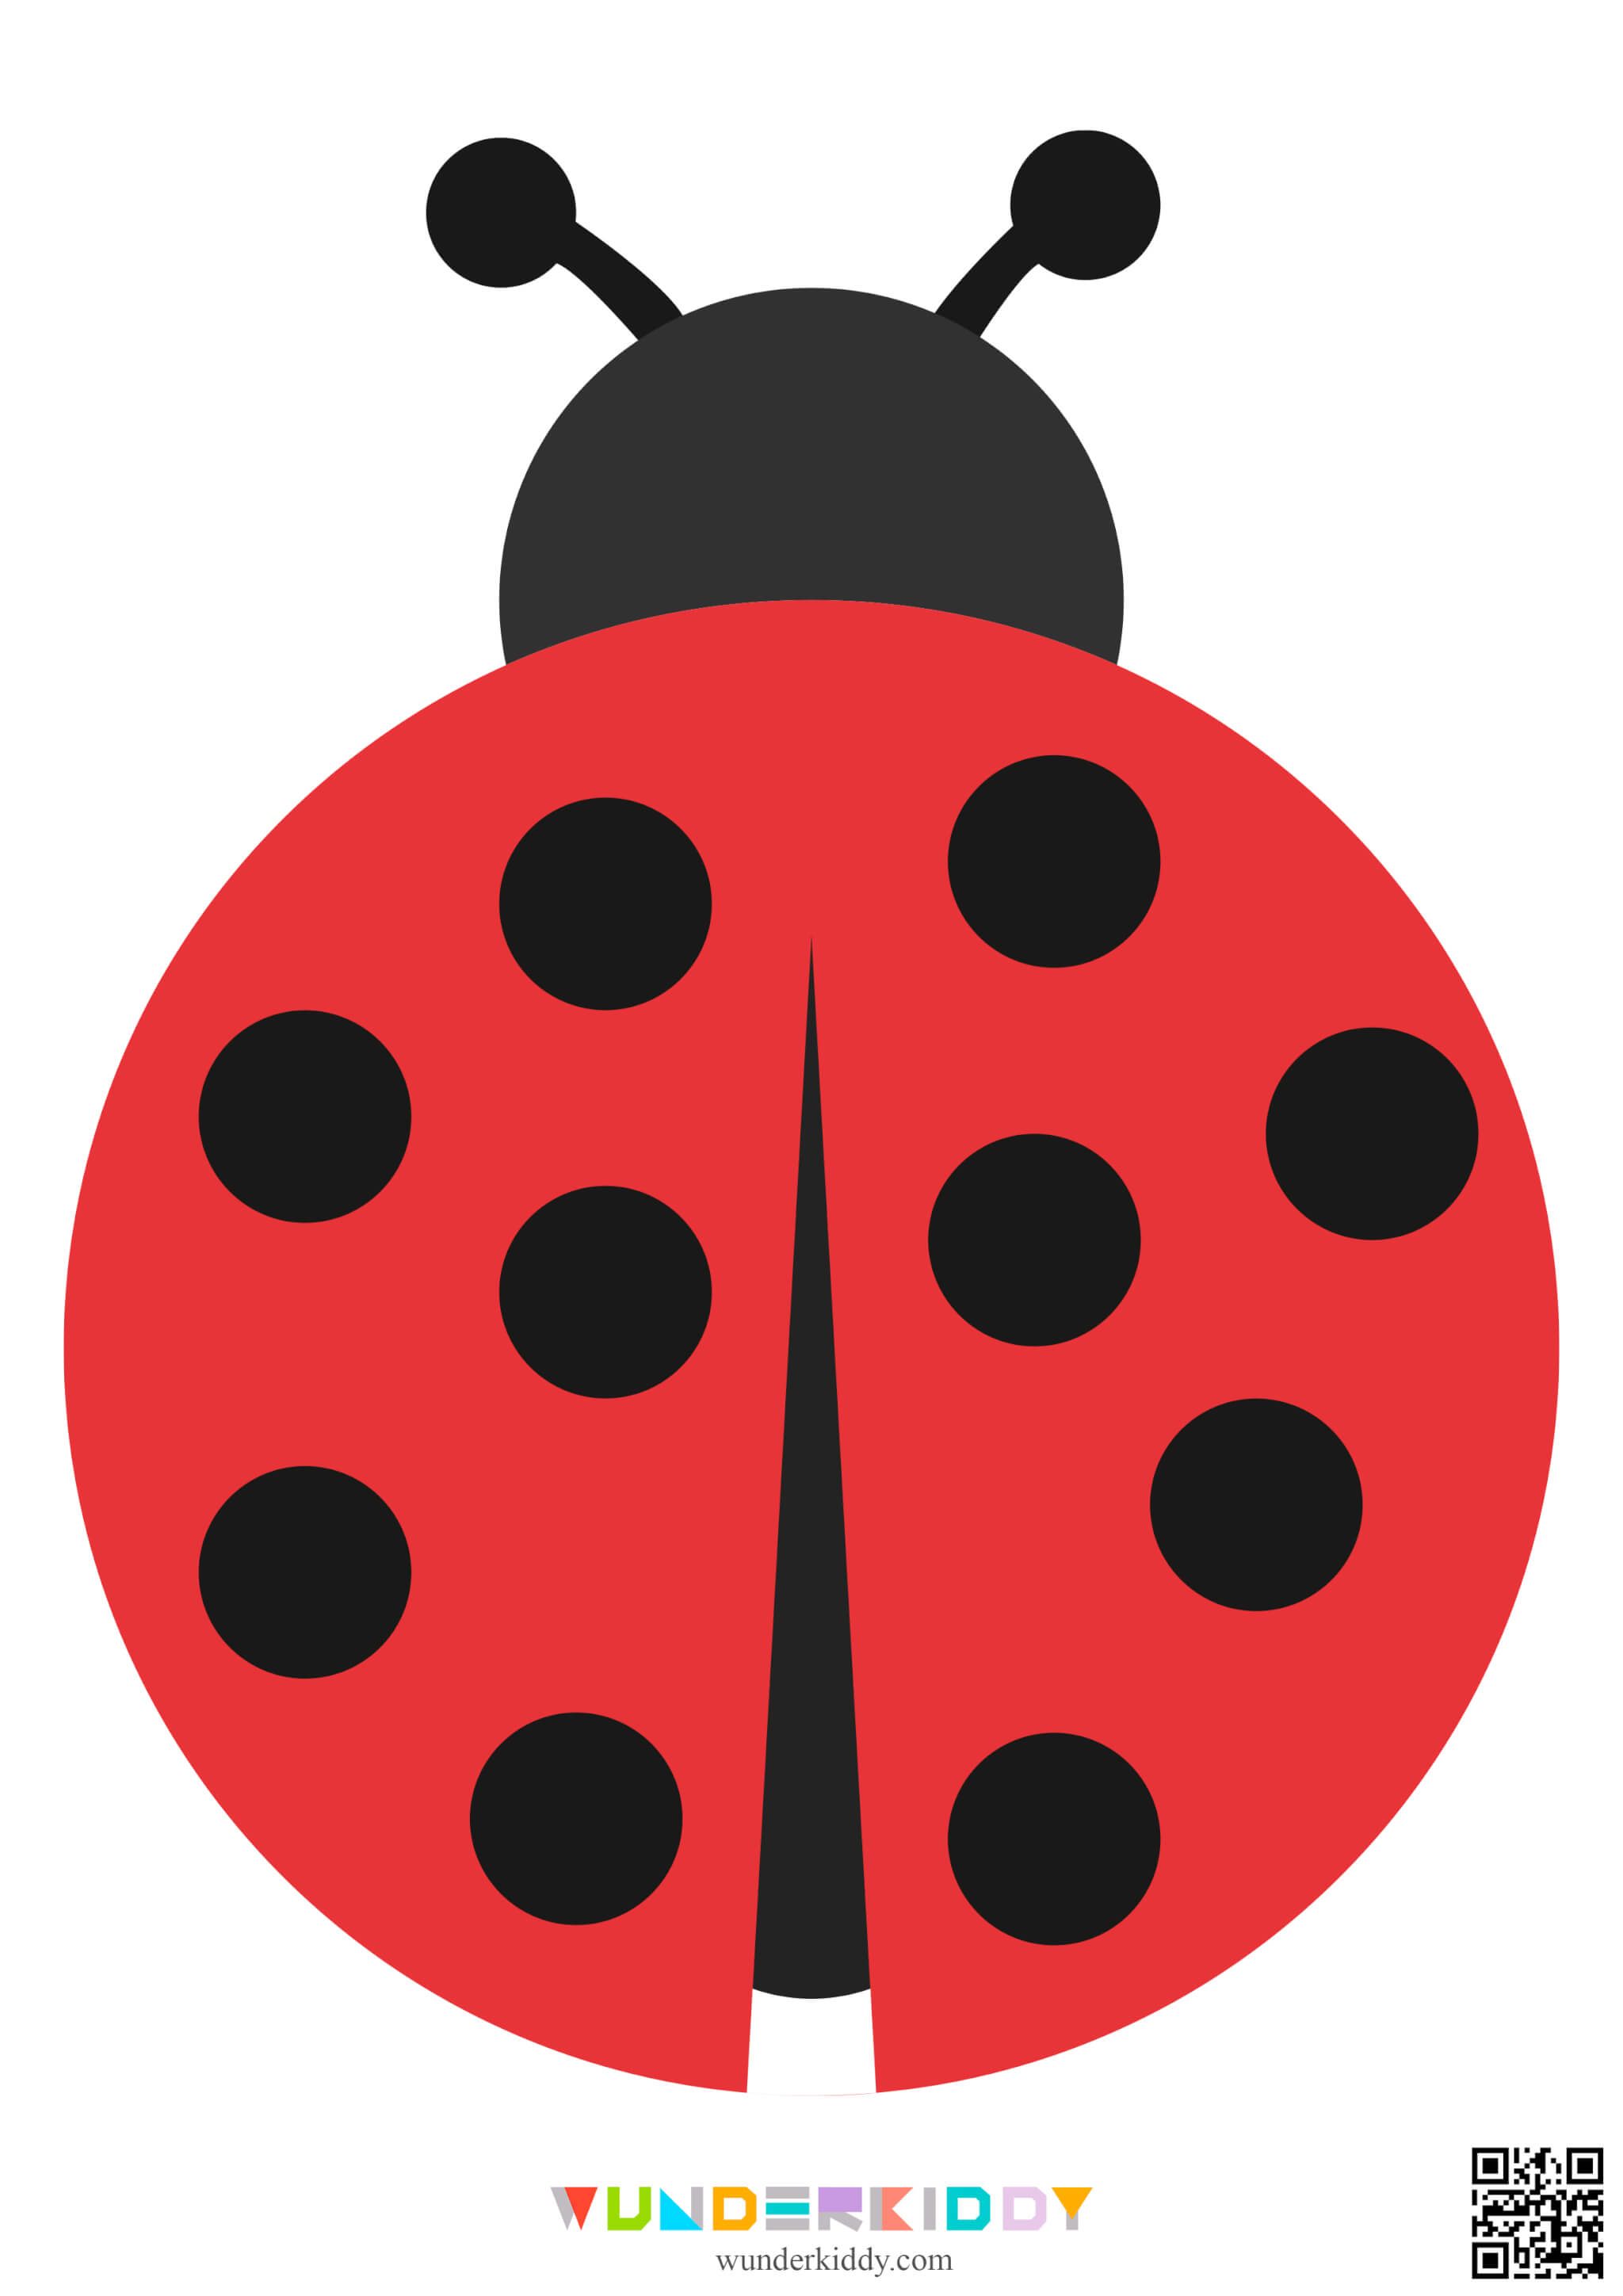 Ladybug Activity and Templates for Kids - Image 8